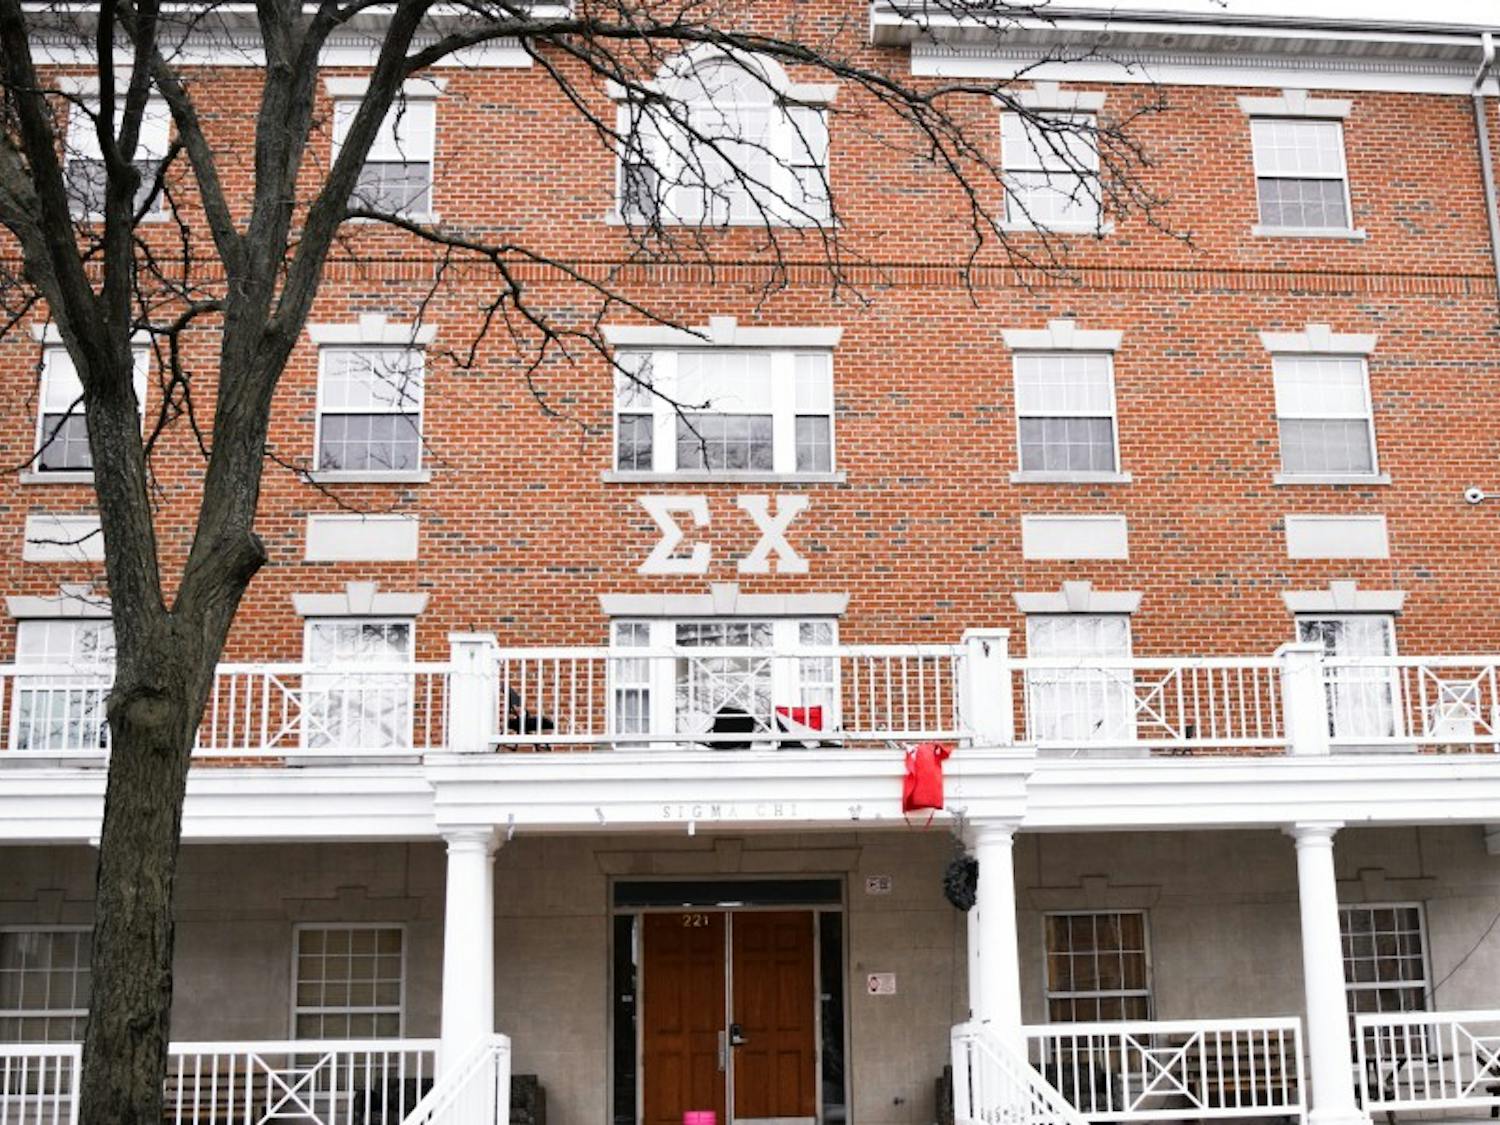 Sigma Chi, whose fraternity house is located at 221 Langdon St., was suspended by the university Tuesday.&nbsp;